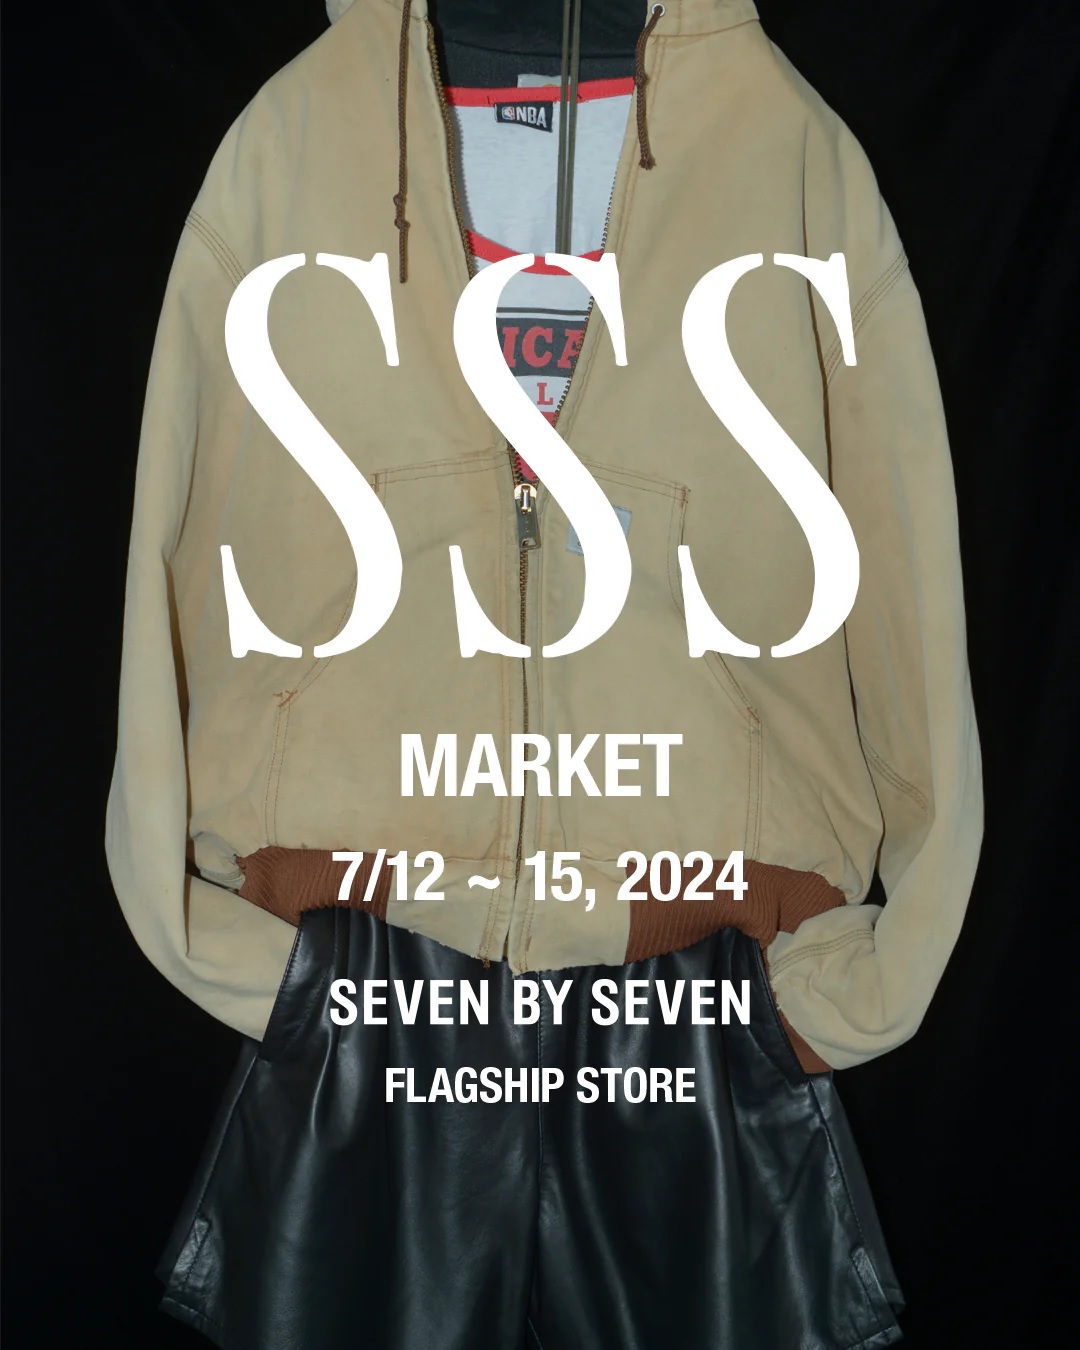 SEVEN BY SEVEN FLAGSHIP STOREにて「SSS MARKET」開催